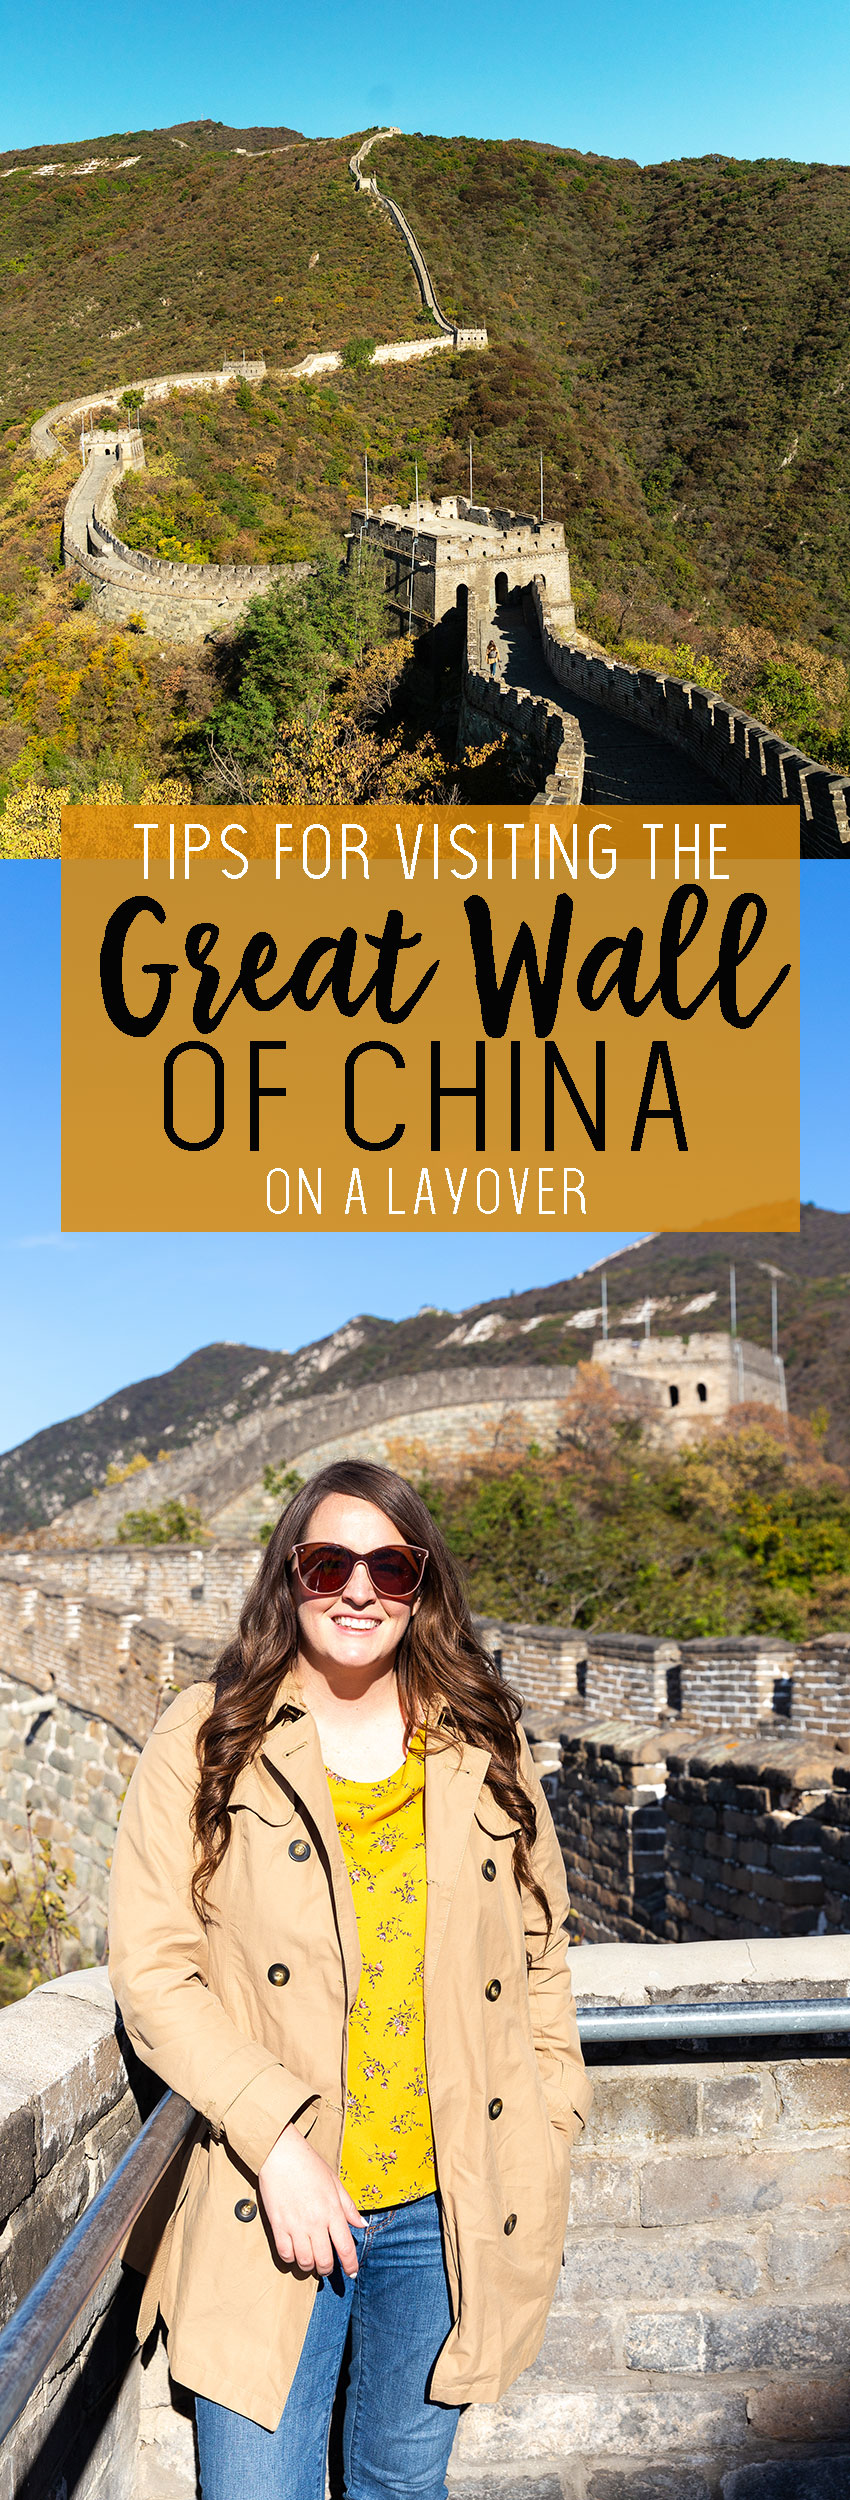 How to visit the Great Wall of China on a layover